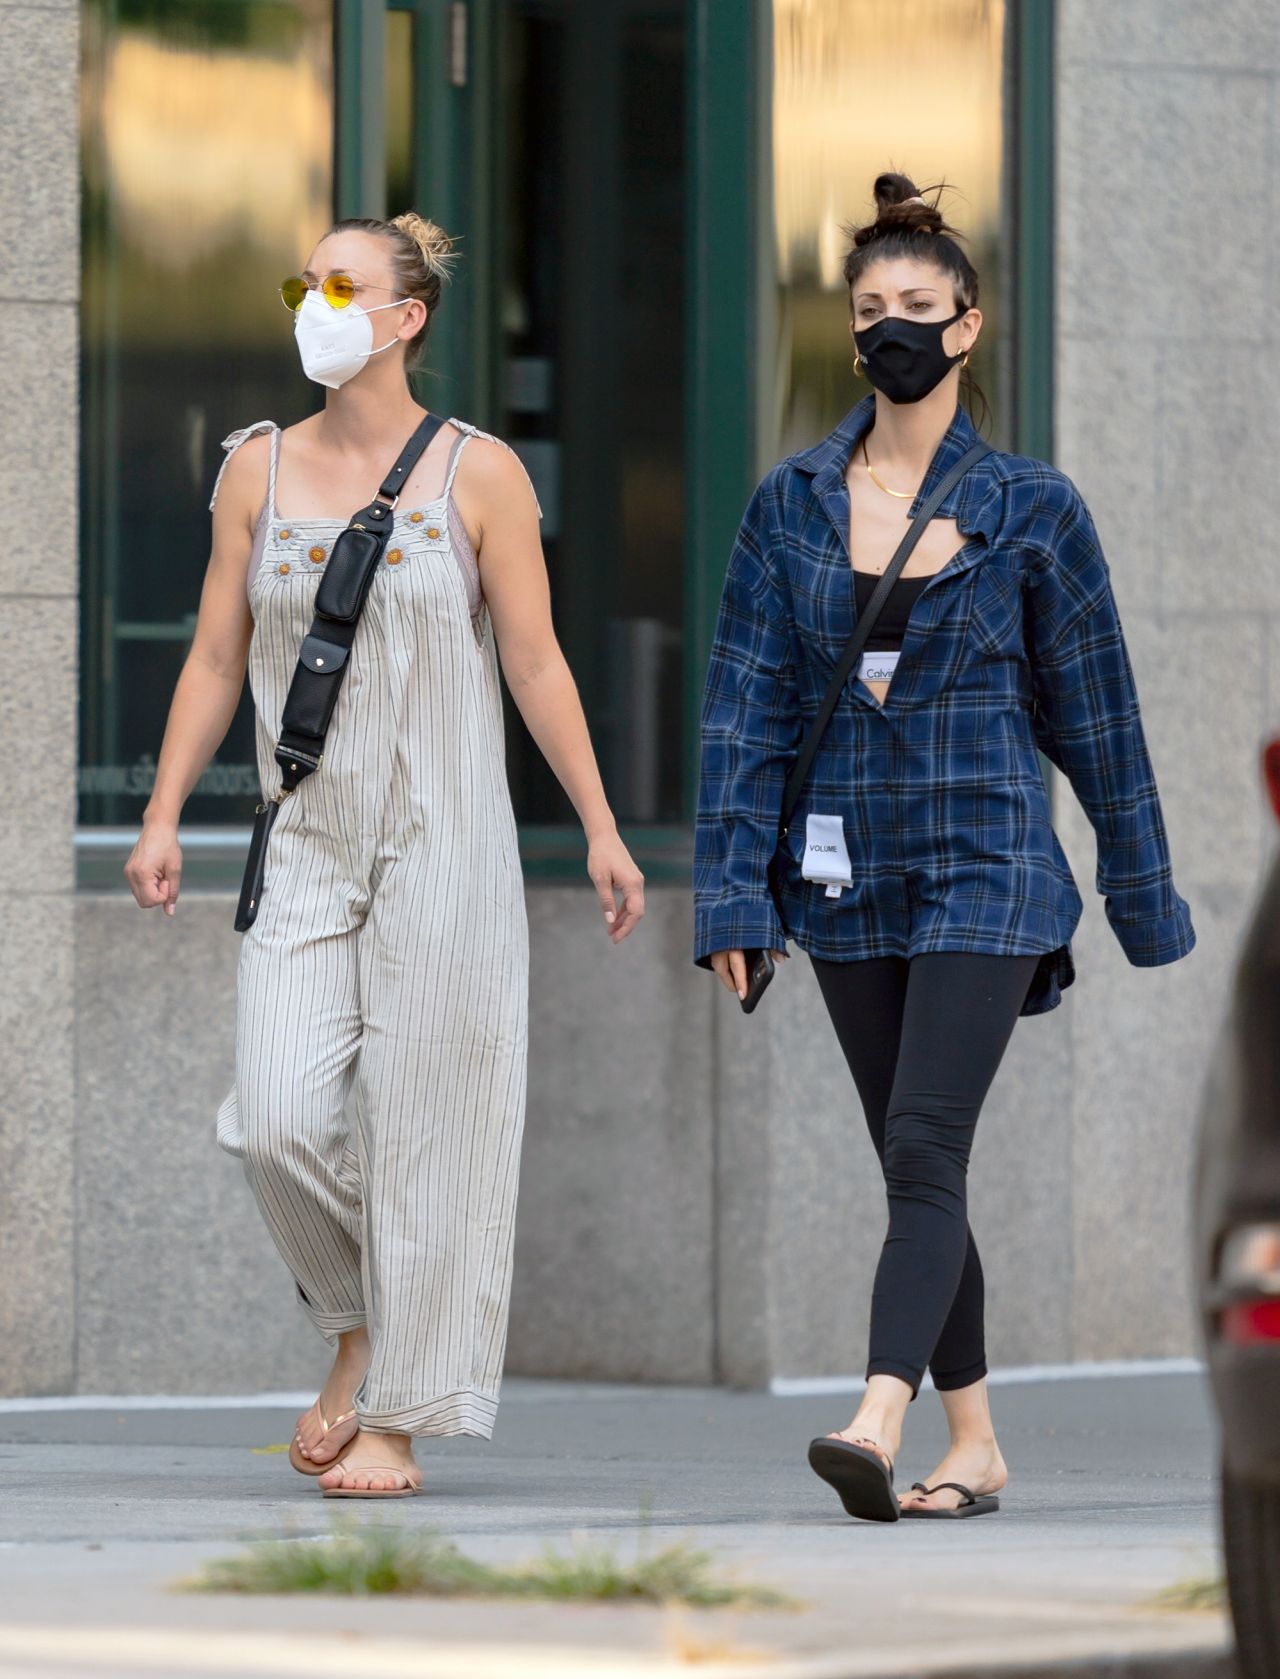 Kaley Cuoco And Briana Cuoco Out In New York 09 06 2020 Celebmafia Kaley cuoco talked tattoos, her new hbo max series the flight attendant, her husband karl cook kaley cuoco credited social distancing with helping her and her husband of almost 2 years karl cook. kaley cuoco and briana cuoco out in